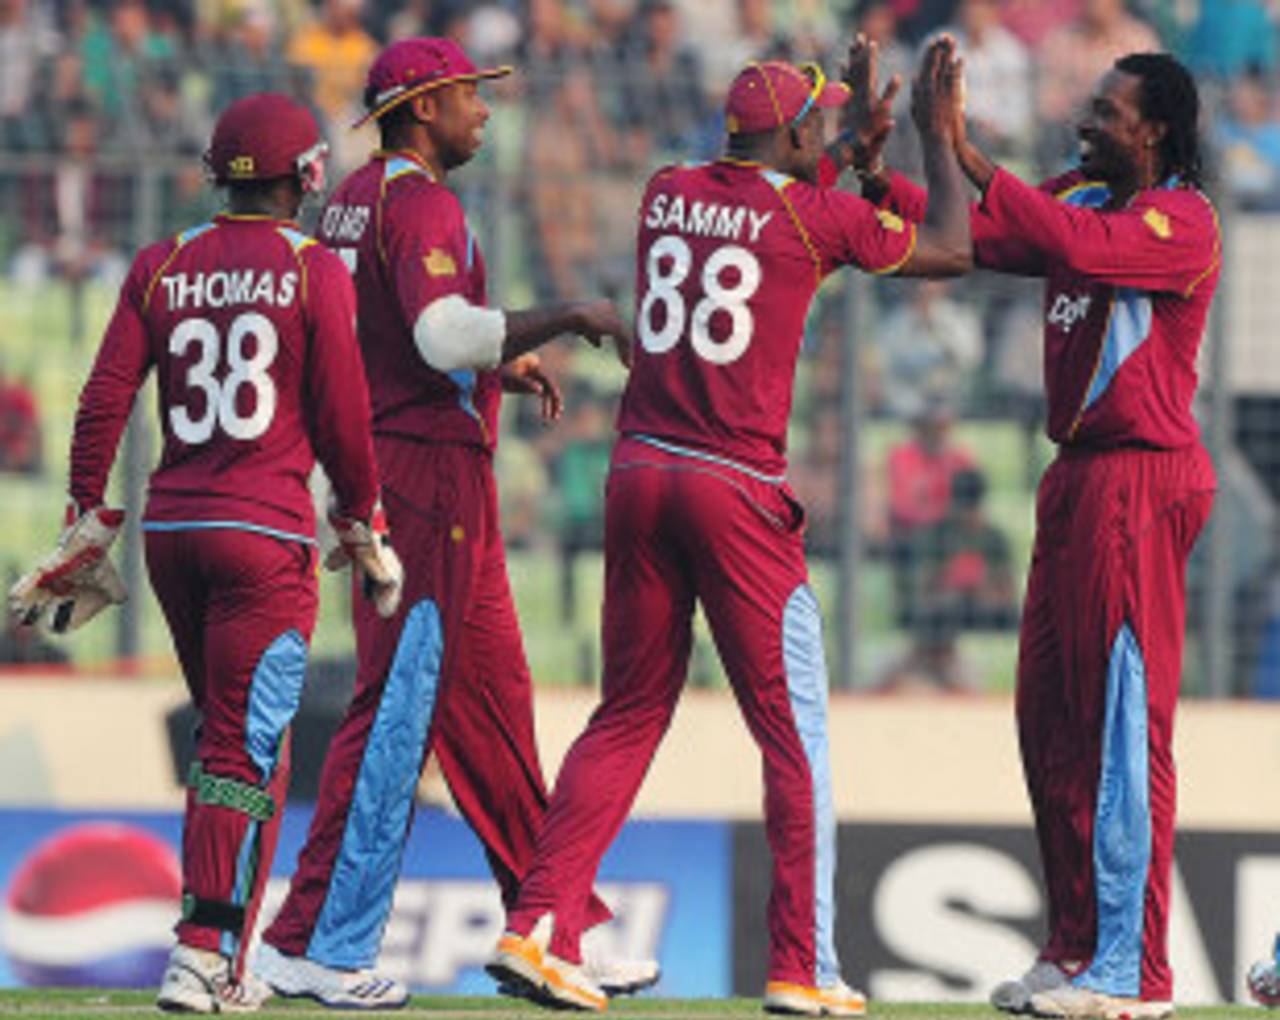 Sunil Narine and Marlon Samuels' exploits meant West Indies stayed afloat in the five-match ODI series&nbsp;&nbsp;&bull;&nbsp;&nbsp;AFP